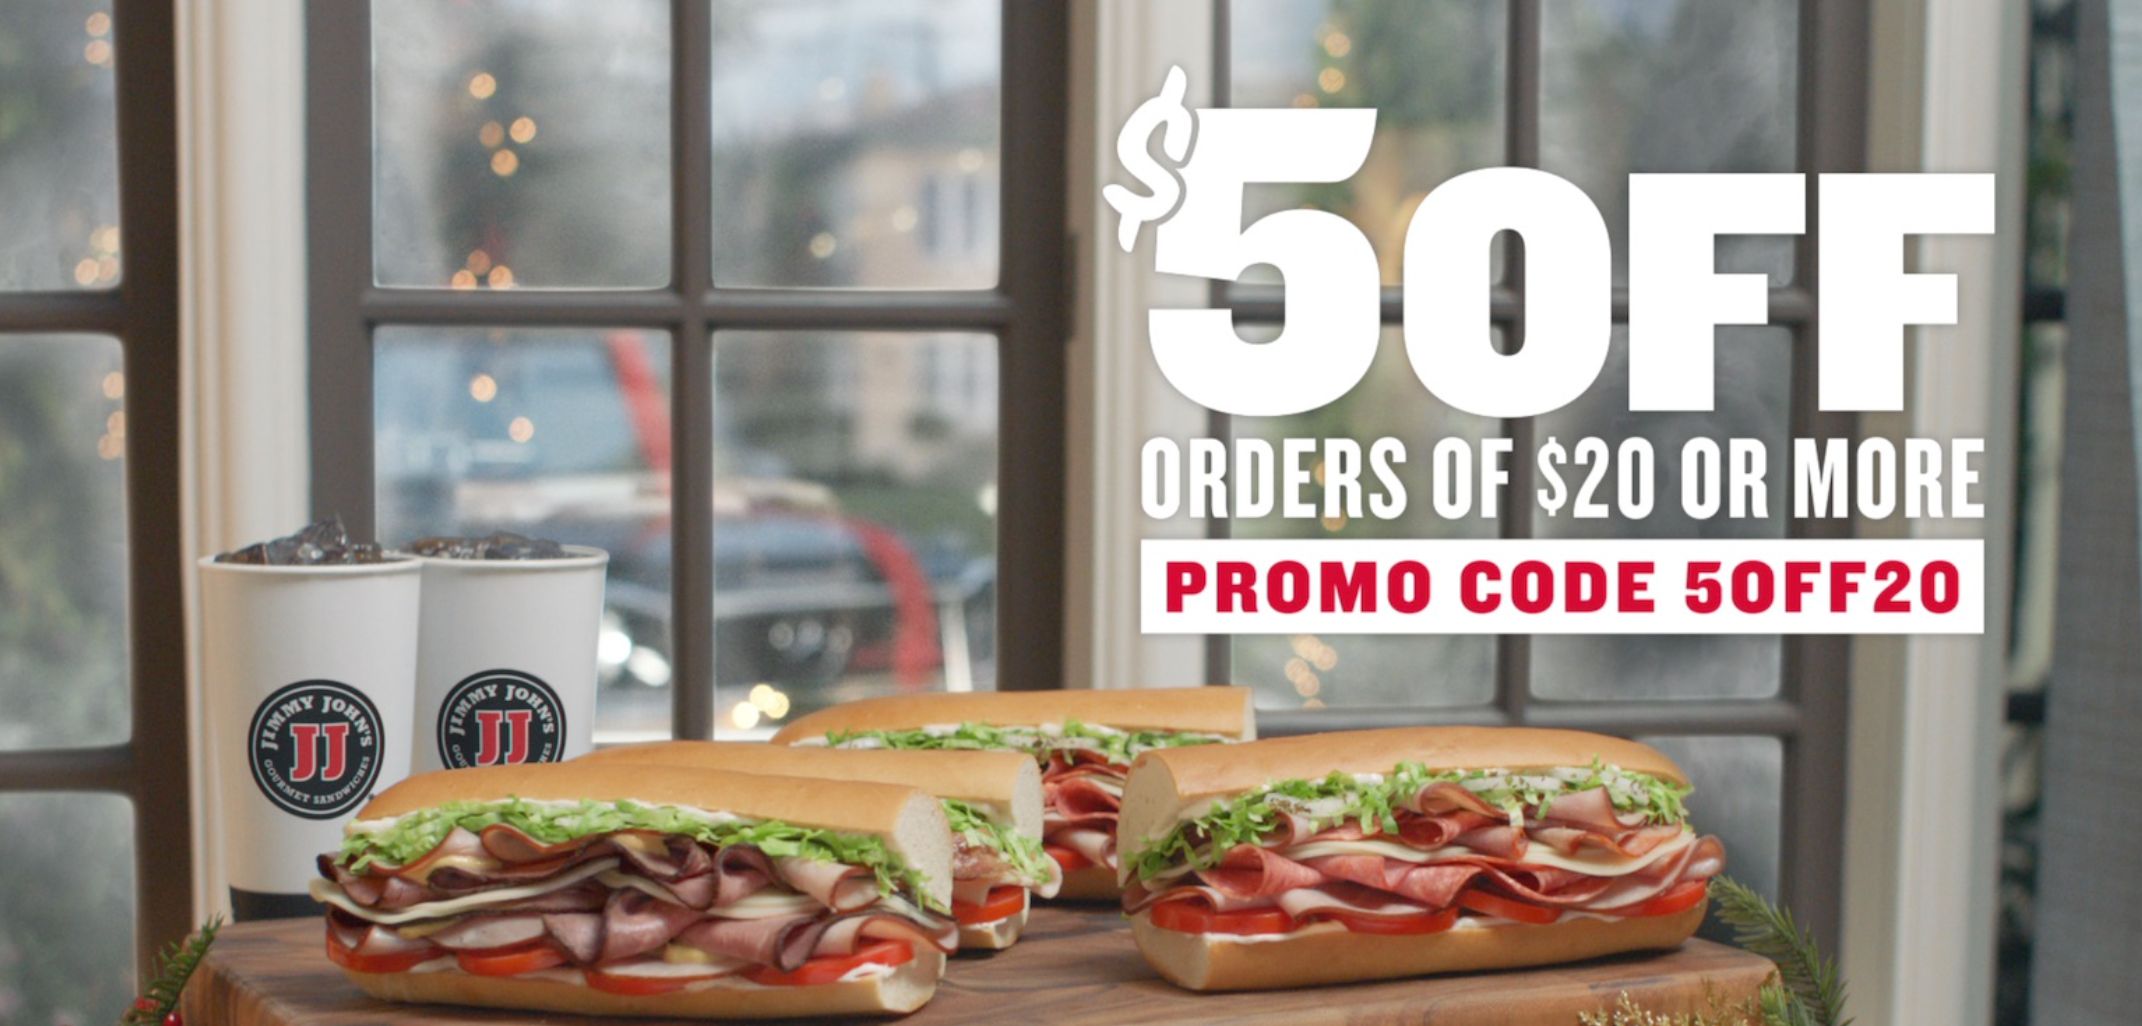 Jimmy John’s Coupon Code For $5 Off $20 is BACK Online!